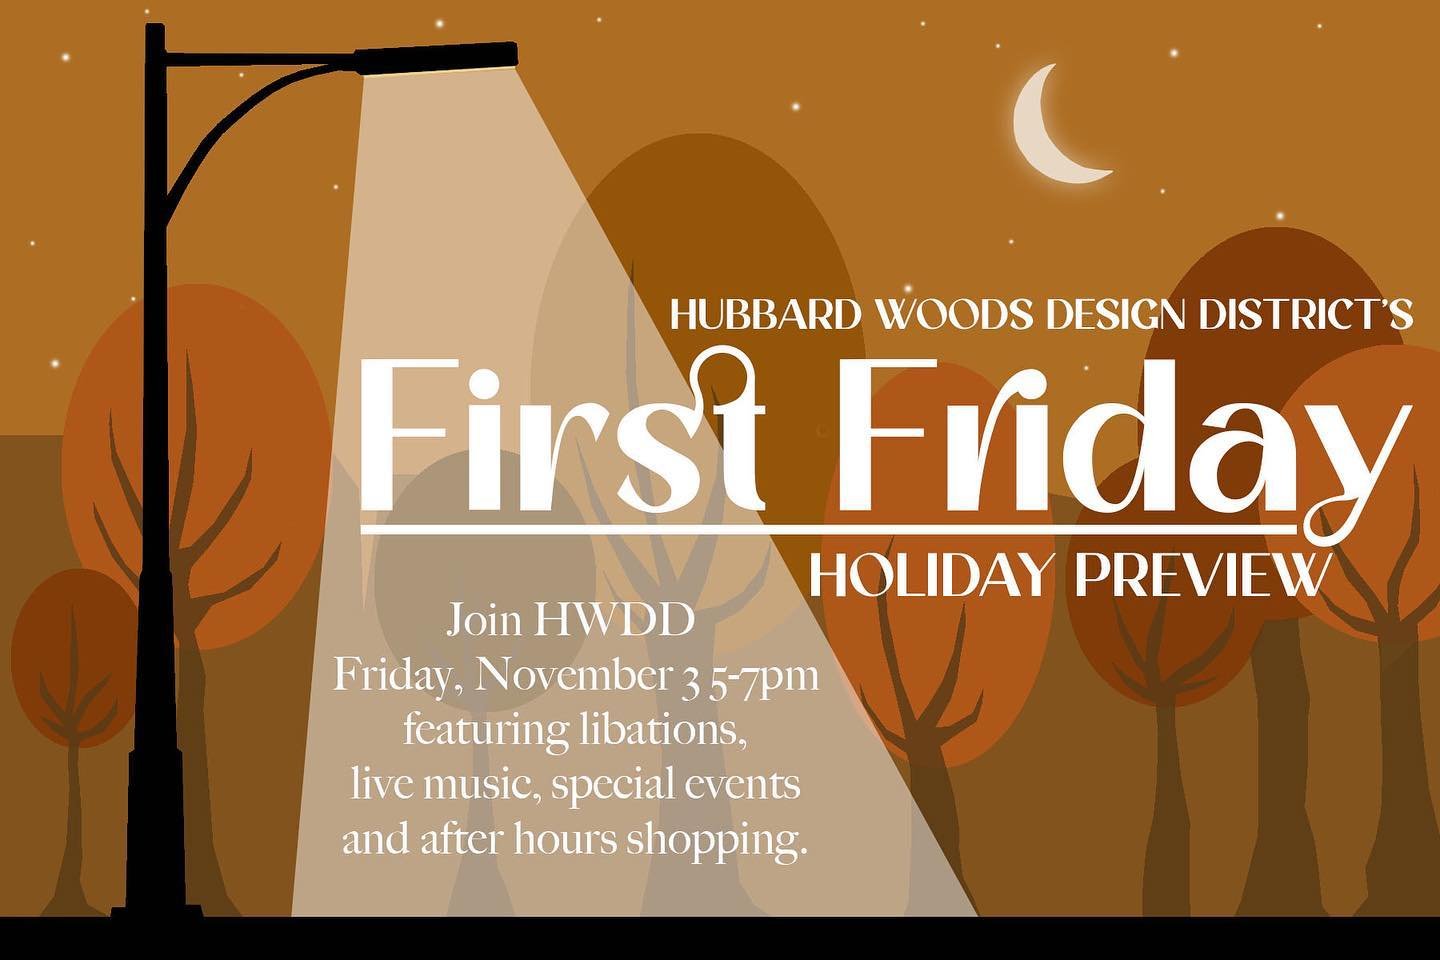 Shop Local Shop Small with HWDD this Friday, November 3rd for our Holiday Preview!
Pop into the shops and see what&rsquo;s new for the holiday season while sipping cocktails and enjoying live music! 
See you Friday! 
.
.
.
.
#firstfriday #holiday #op